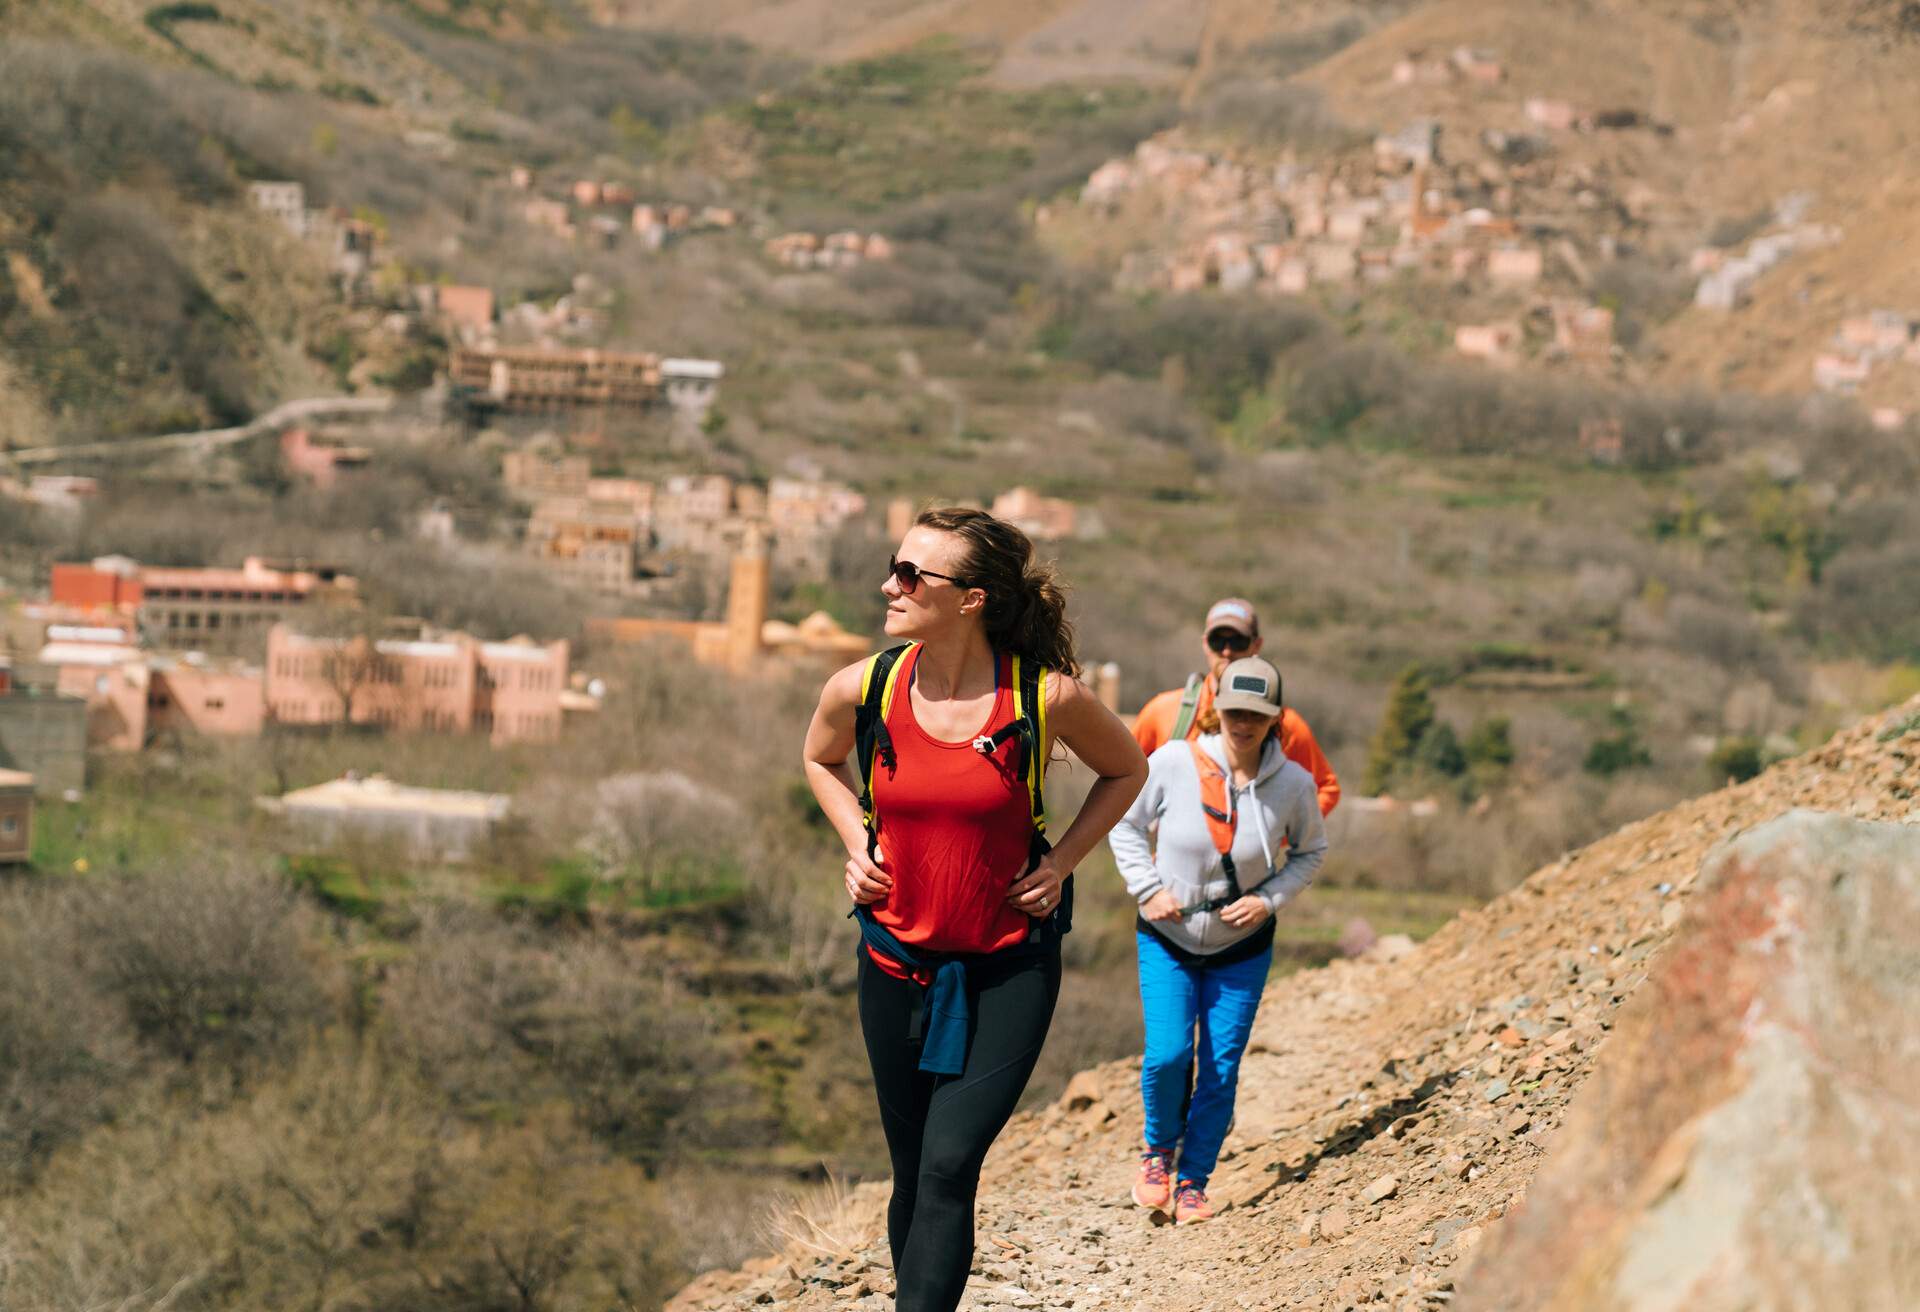 DEST_MAROCCO_ATLAS_MOUNTAINS_PEOPLE_WOMAN_HIKE_HIKING_GettyImages-947177782.jpg